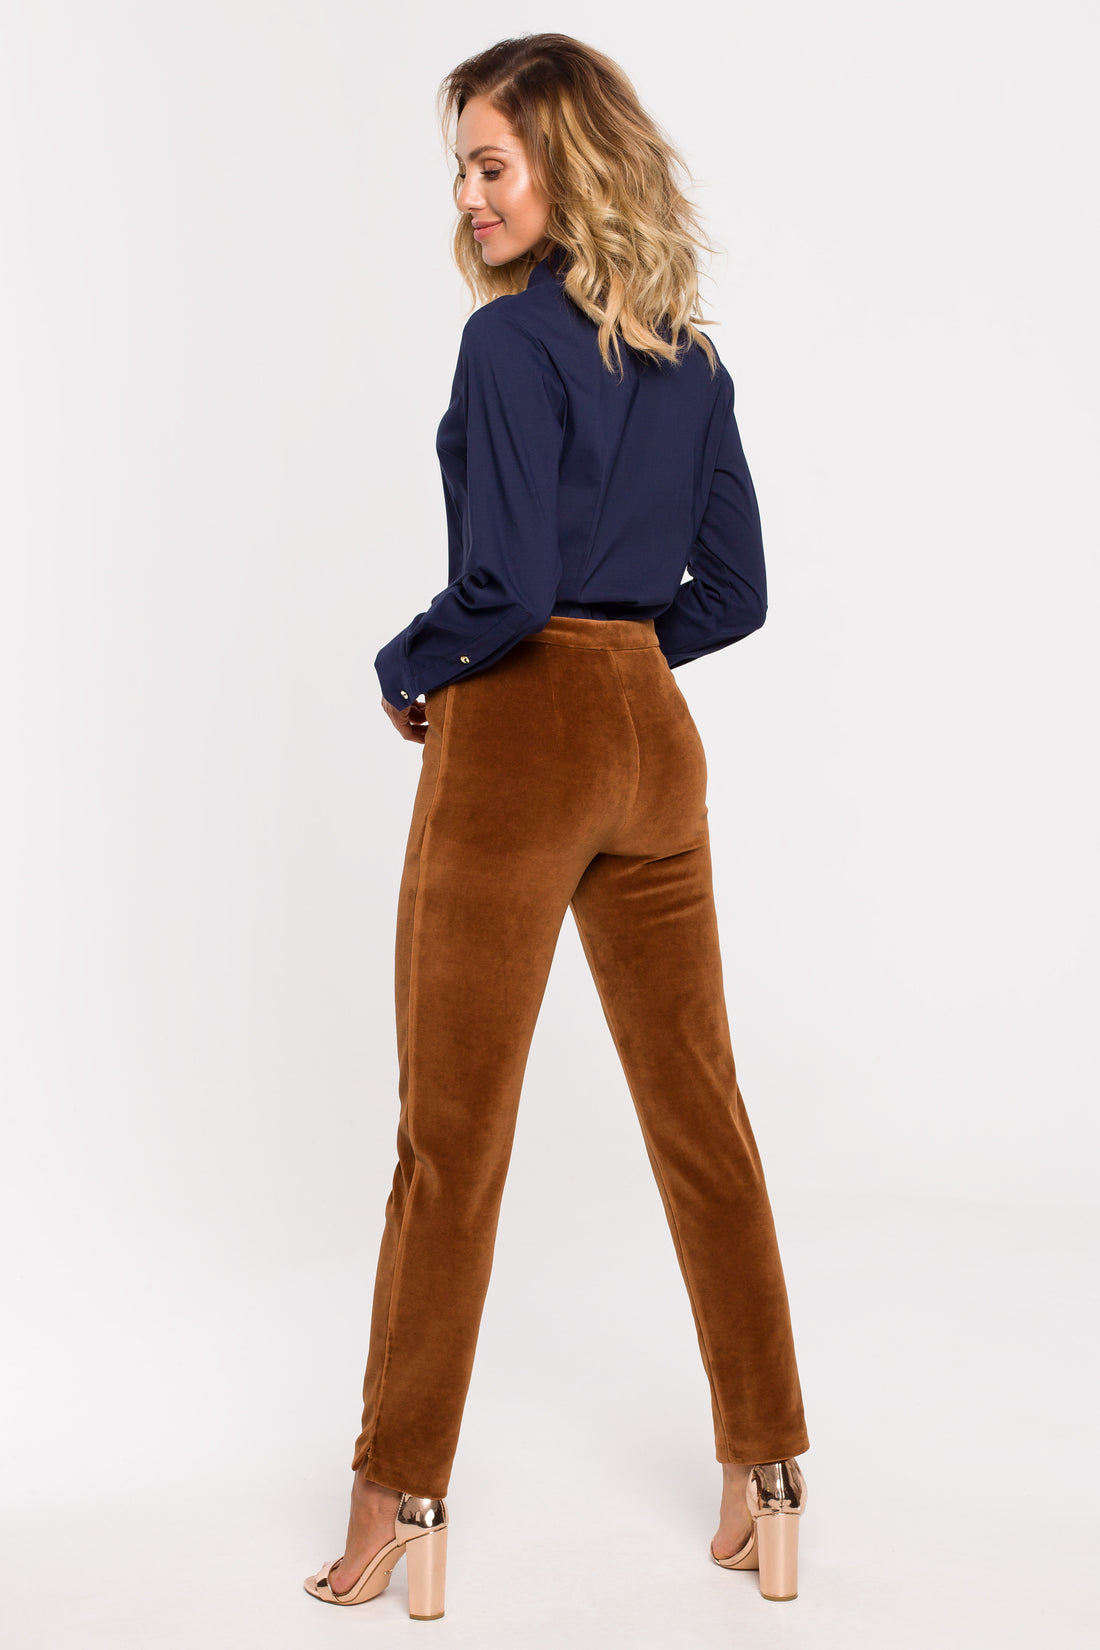 Burnt Orange Trousers Suit Separate. Our newest addition in the trendy captivating hue of burnt orange. Elegant trousers in a soft and smooth stretch cotton-based velour, exceptional for everyday, office, and special occasion styling. 